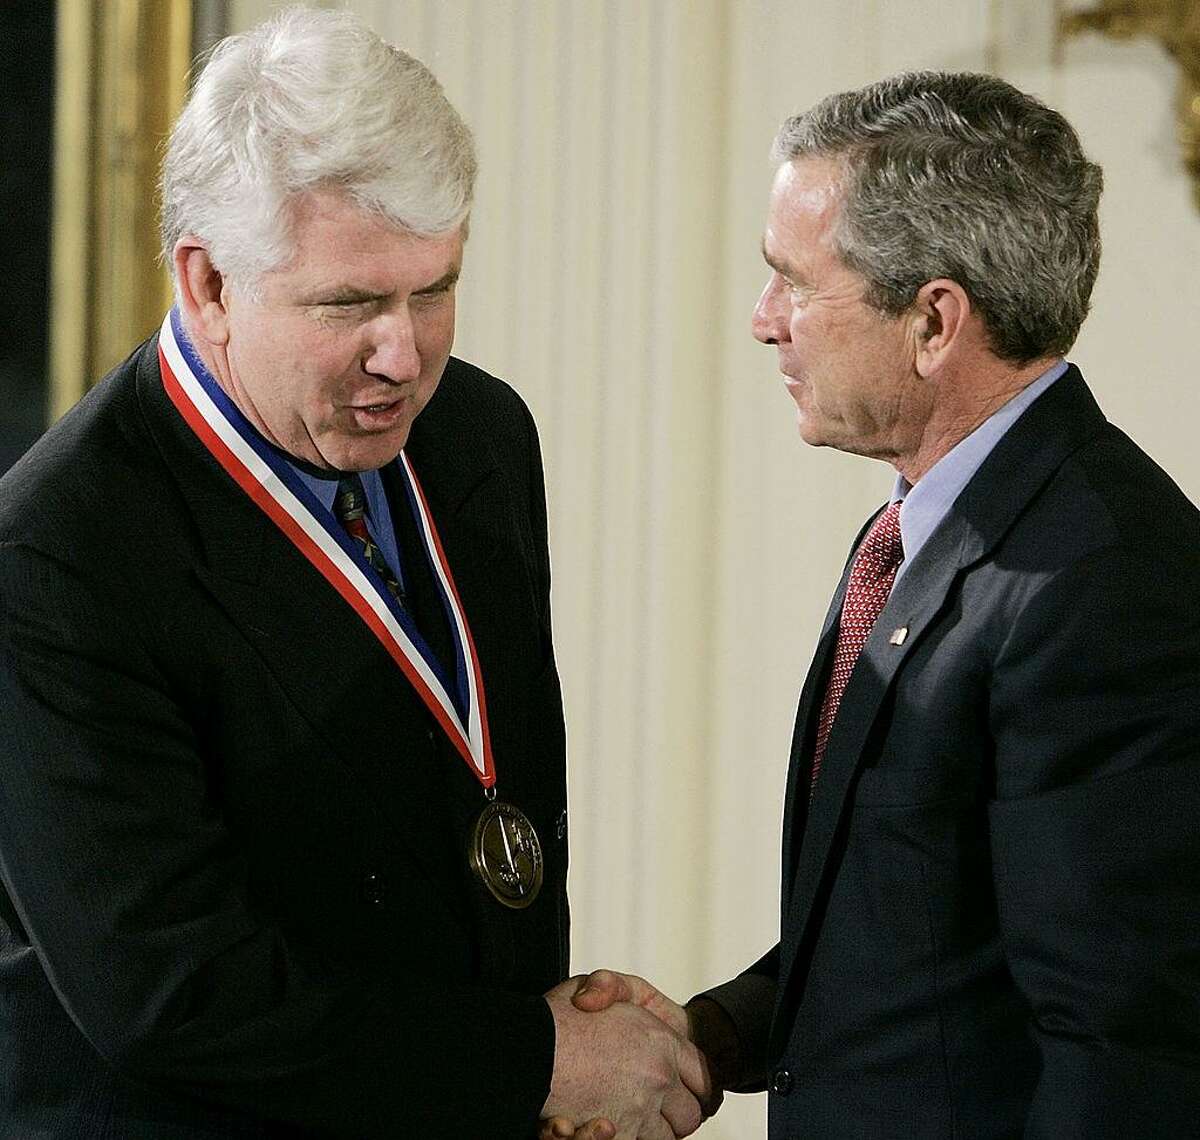 WASHINGTON - MARCH 14: U.S. President George W. Bush (R) shakes hands with Robert Metcalfe during a presentation of the National Medals of Science and Technology in the East Room of the White House, March 14, 2005 in Washington DC. Metcalfe won the medal, the nations highest honor for technological achievement, for inventing and standardizing Ethernet, the system for networking computers within a building using hardware. (Photo by Mark Wilson/Getty Images)